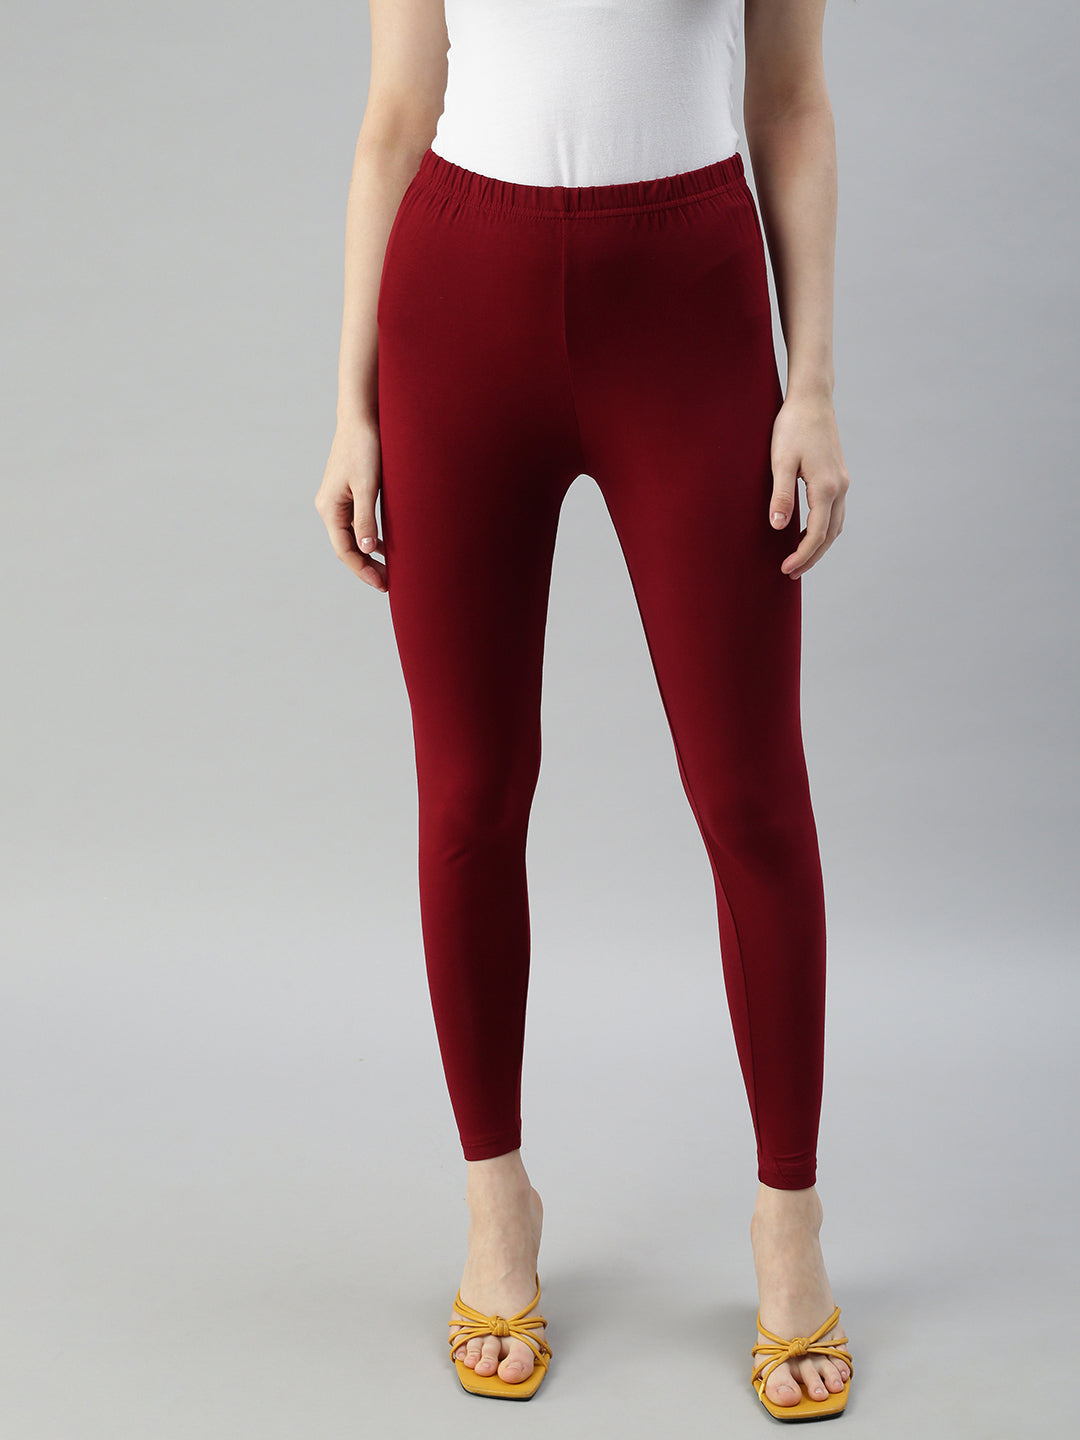 Prisma L Brown Girls Legging in All-India - Dealers, Manufacturers &  Suppliers - Justdial